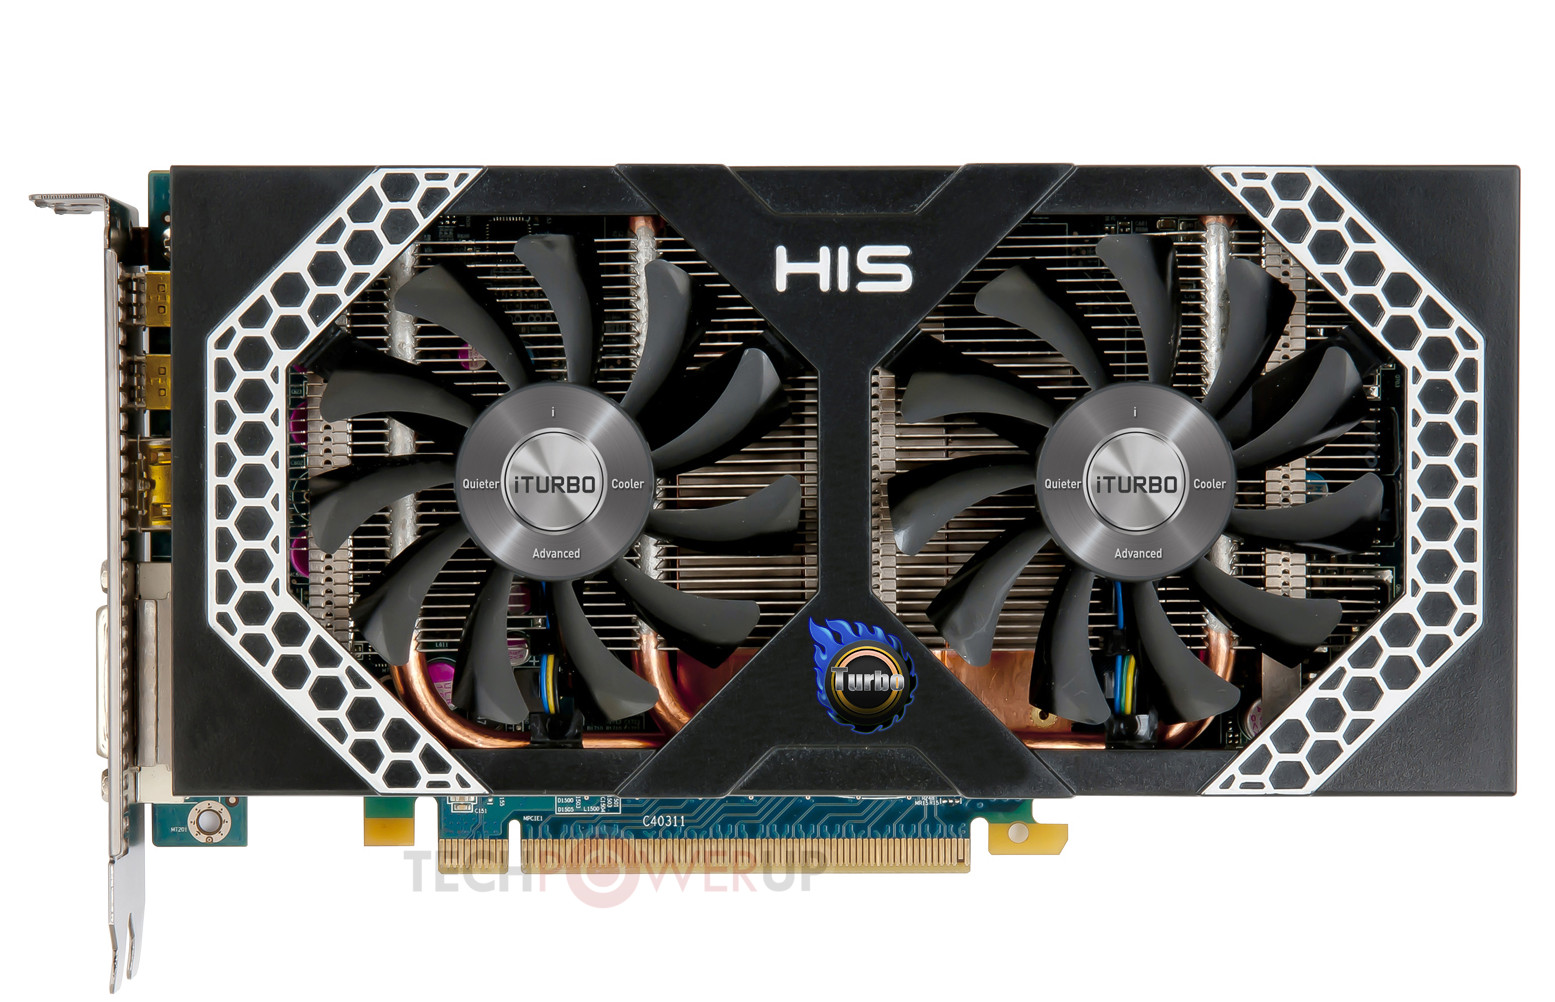 HIS HD 7850 iPower IceQ Turbo 4GB GPU Review with Crossfire